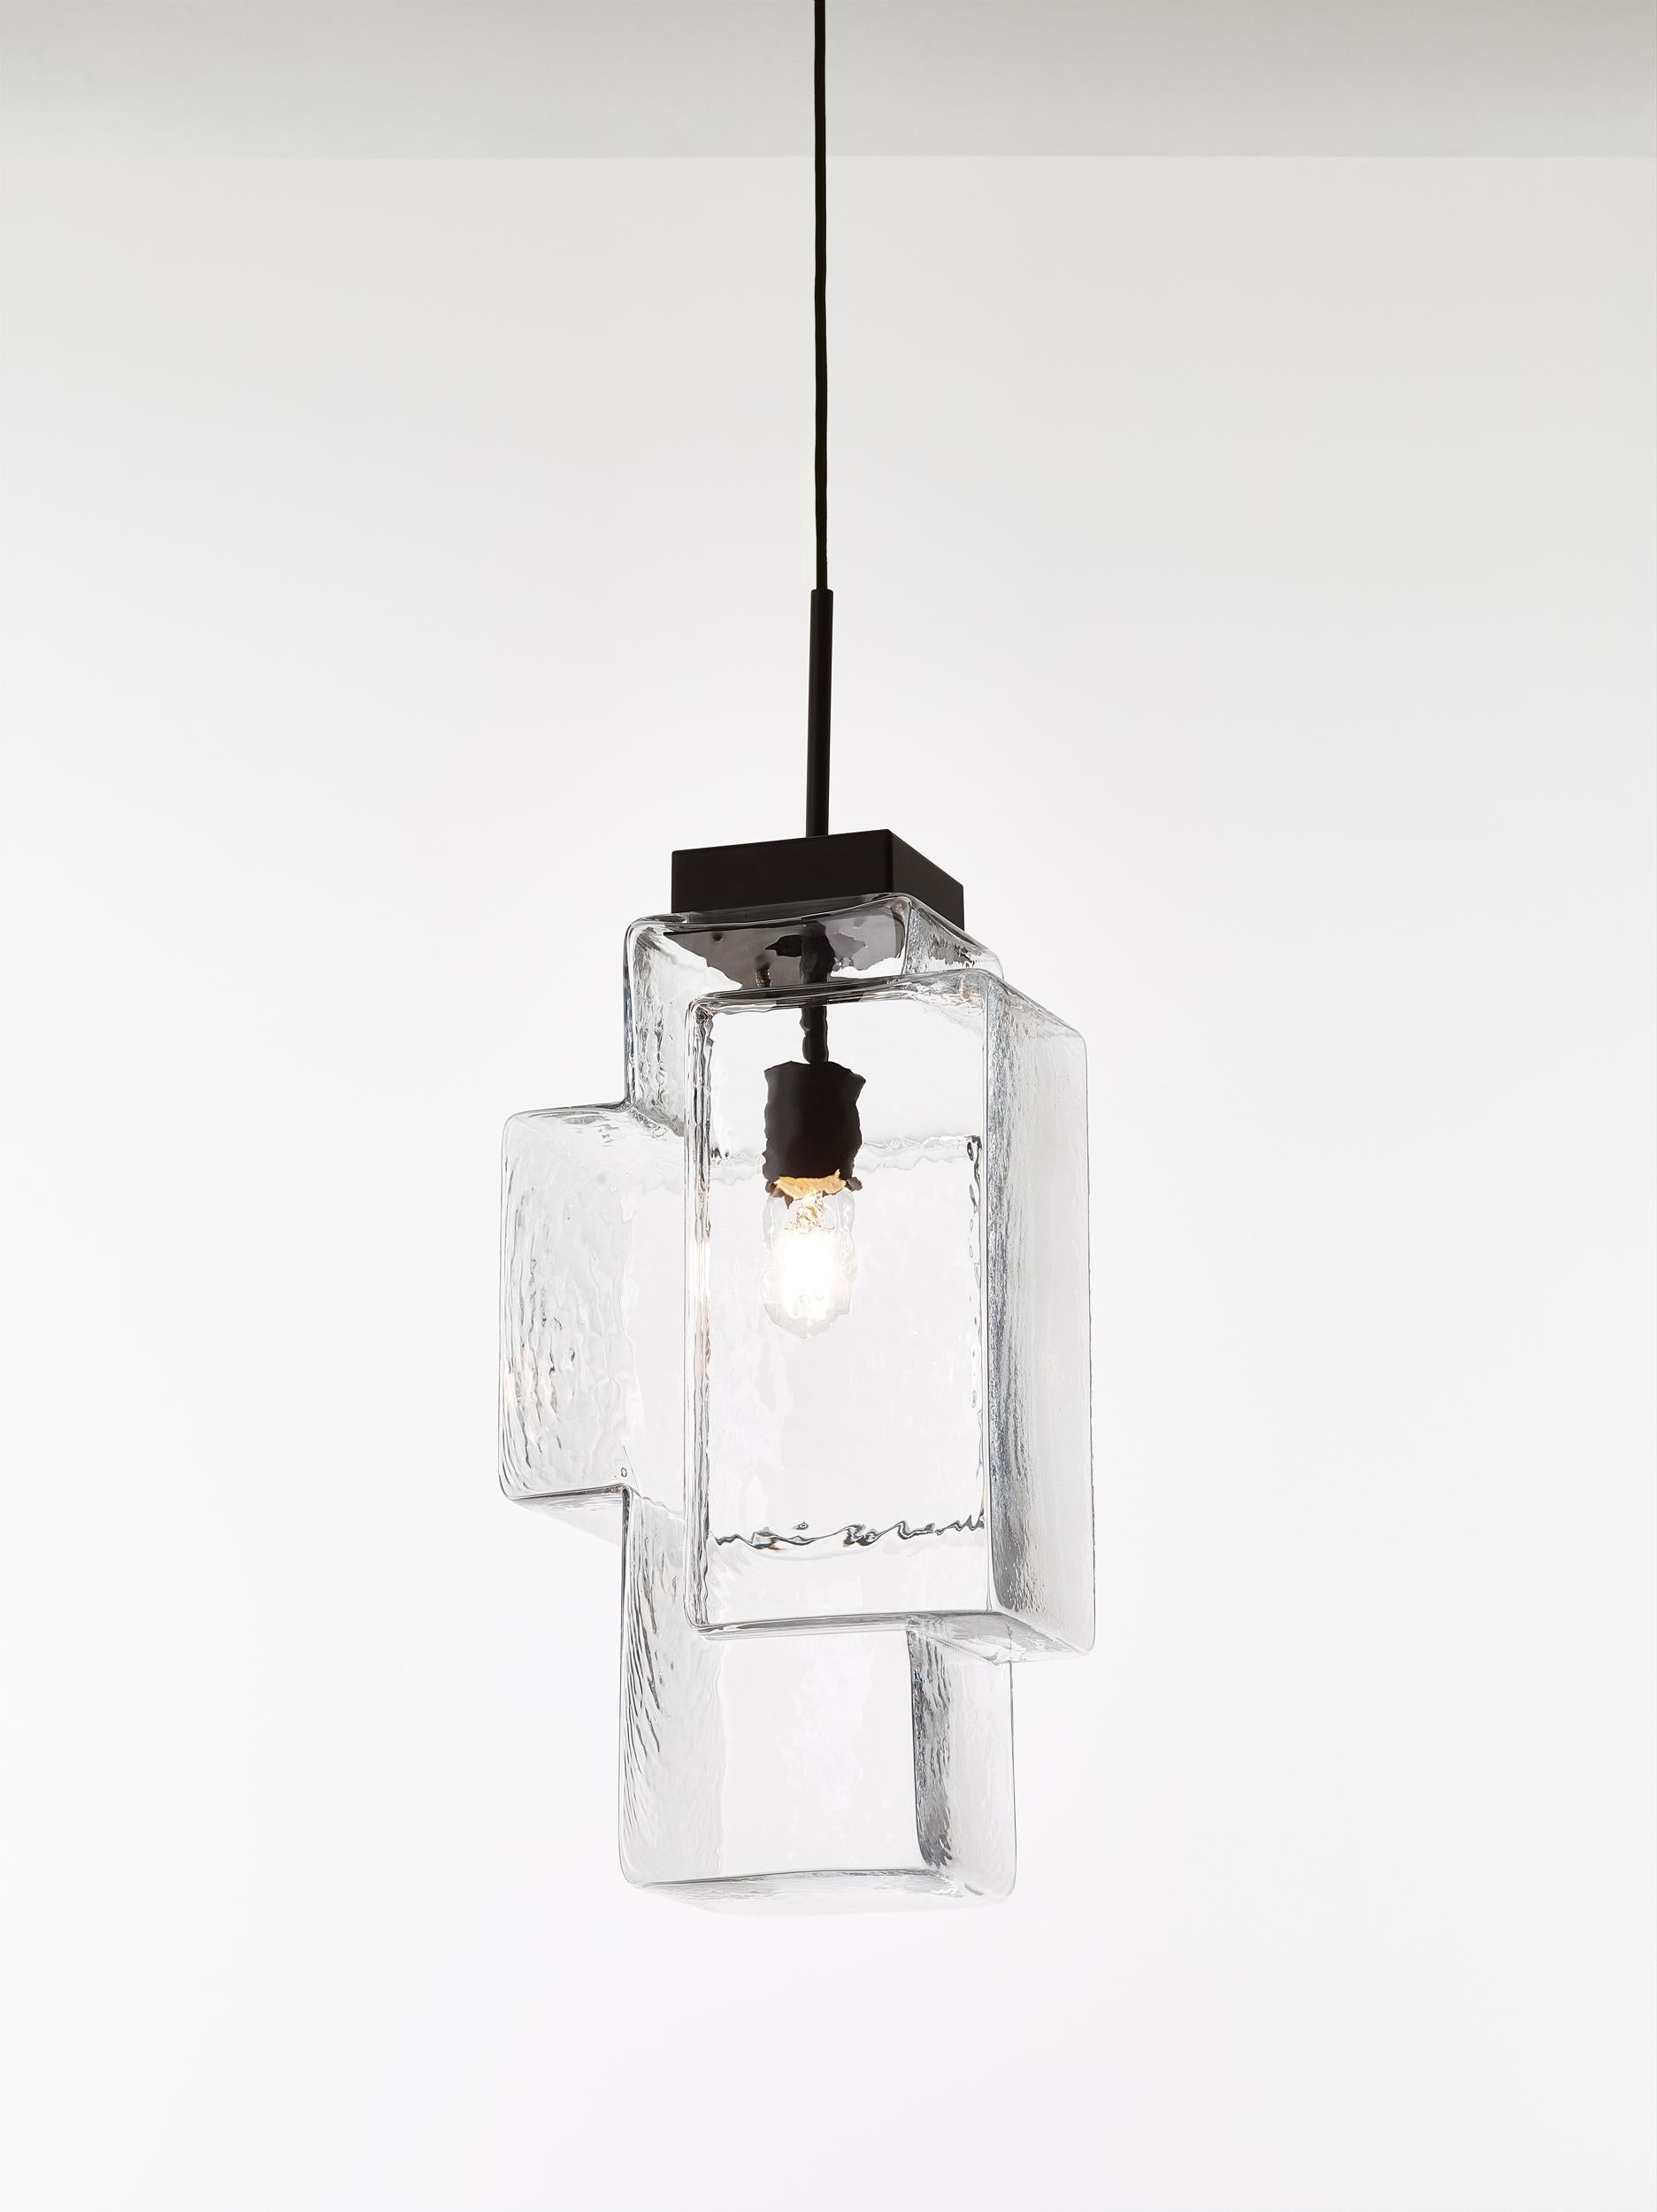 Set of 2 crystal clear tetris pendant light by Dechem Studio
Dimensions: W 30 x D 23 x H 200 cm
Materials: metal, glass.
Also available: different colours available,

In this complex lighting fixture, strict geometric and architectural lines